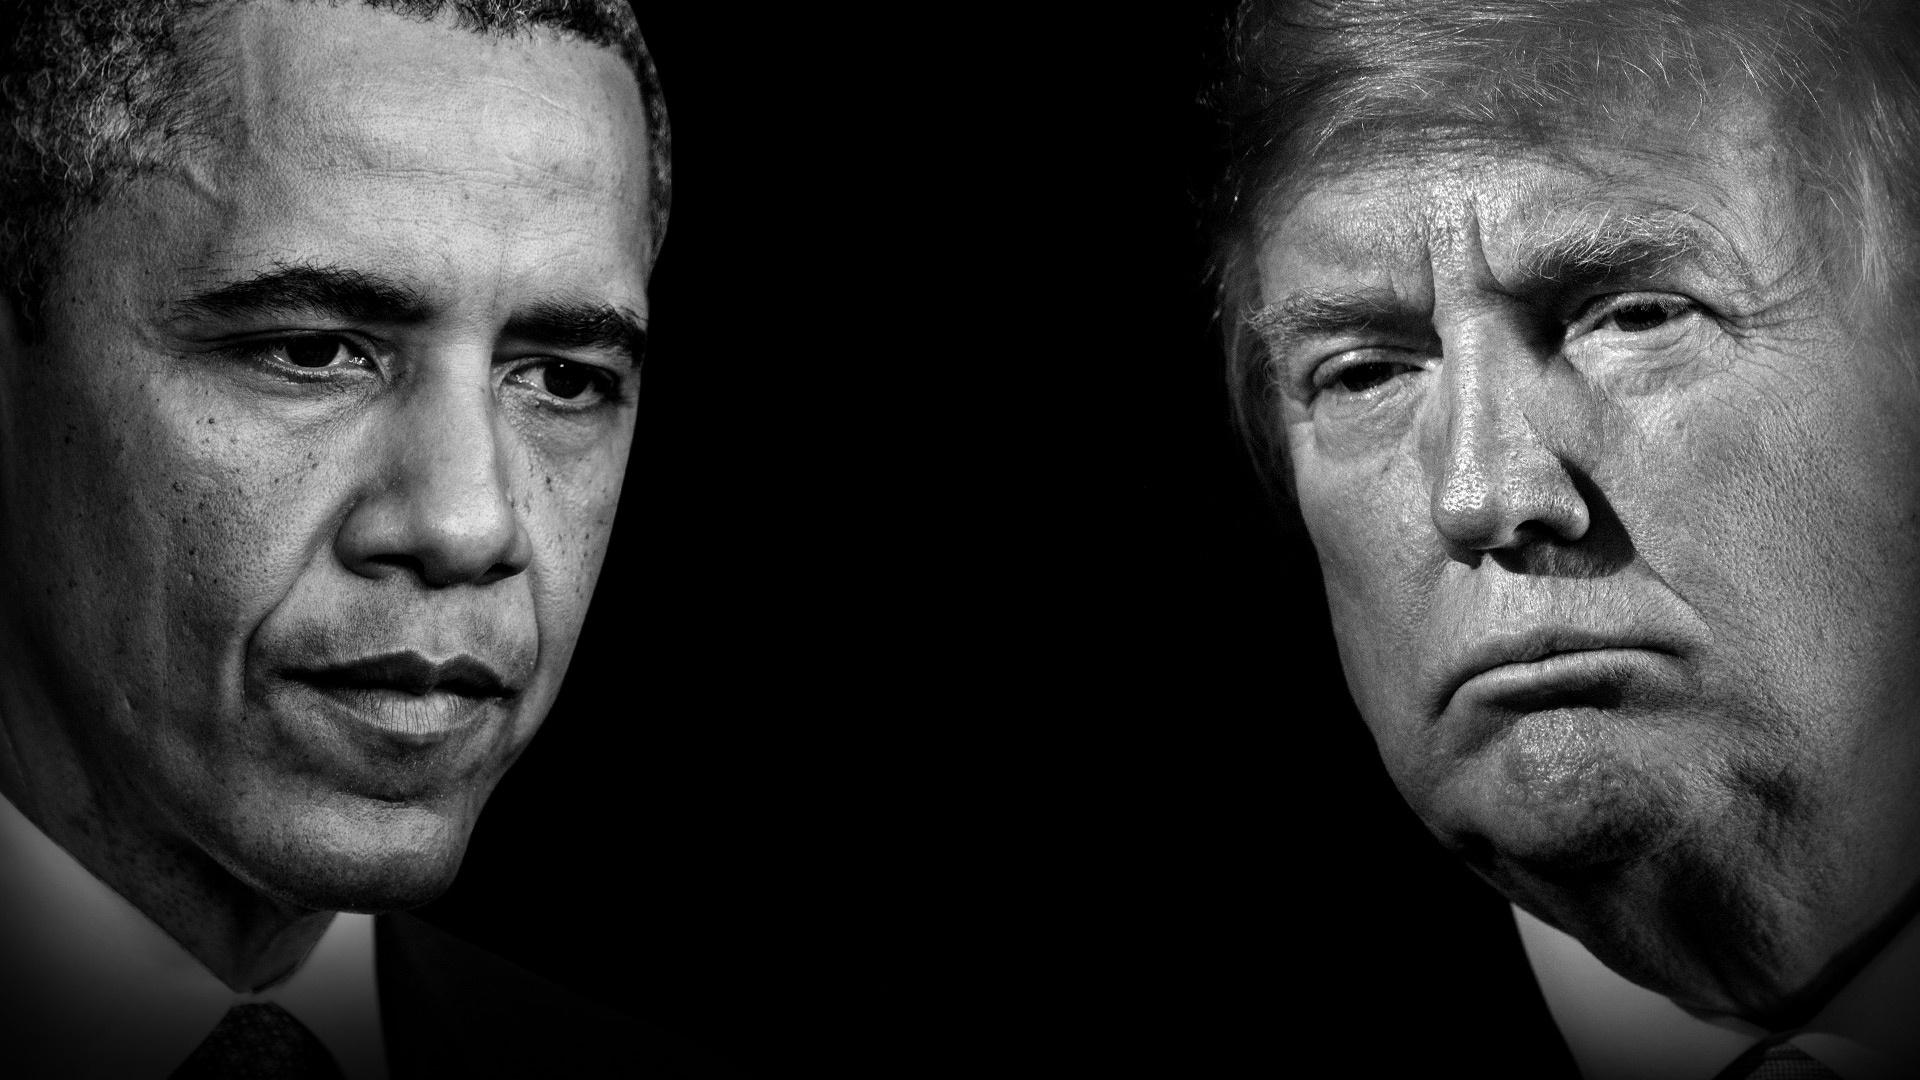 "America's Great Divide: From Obama to Trump" - Preview